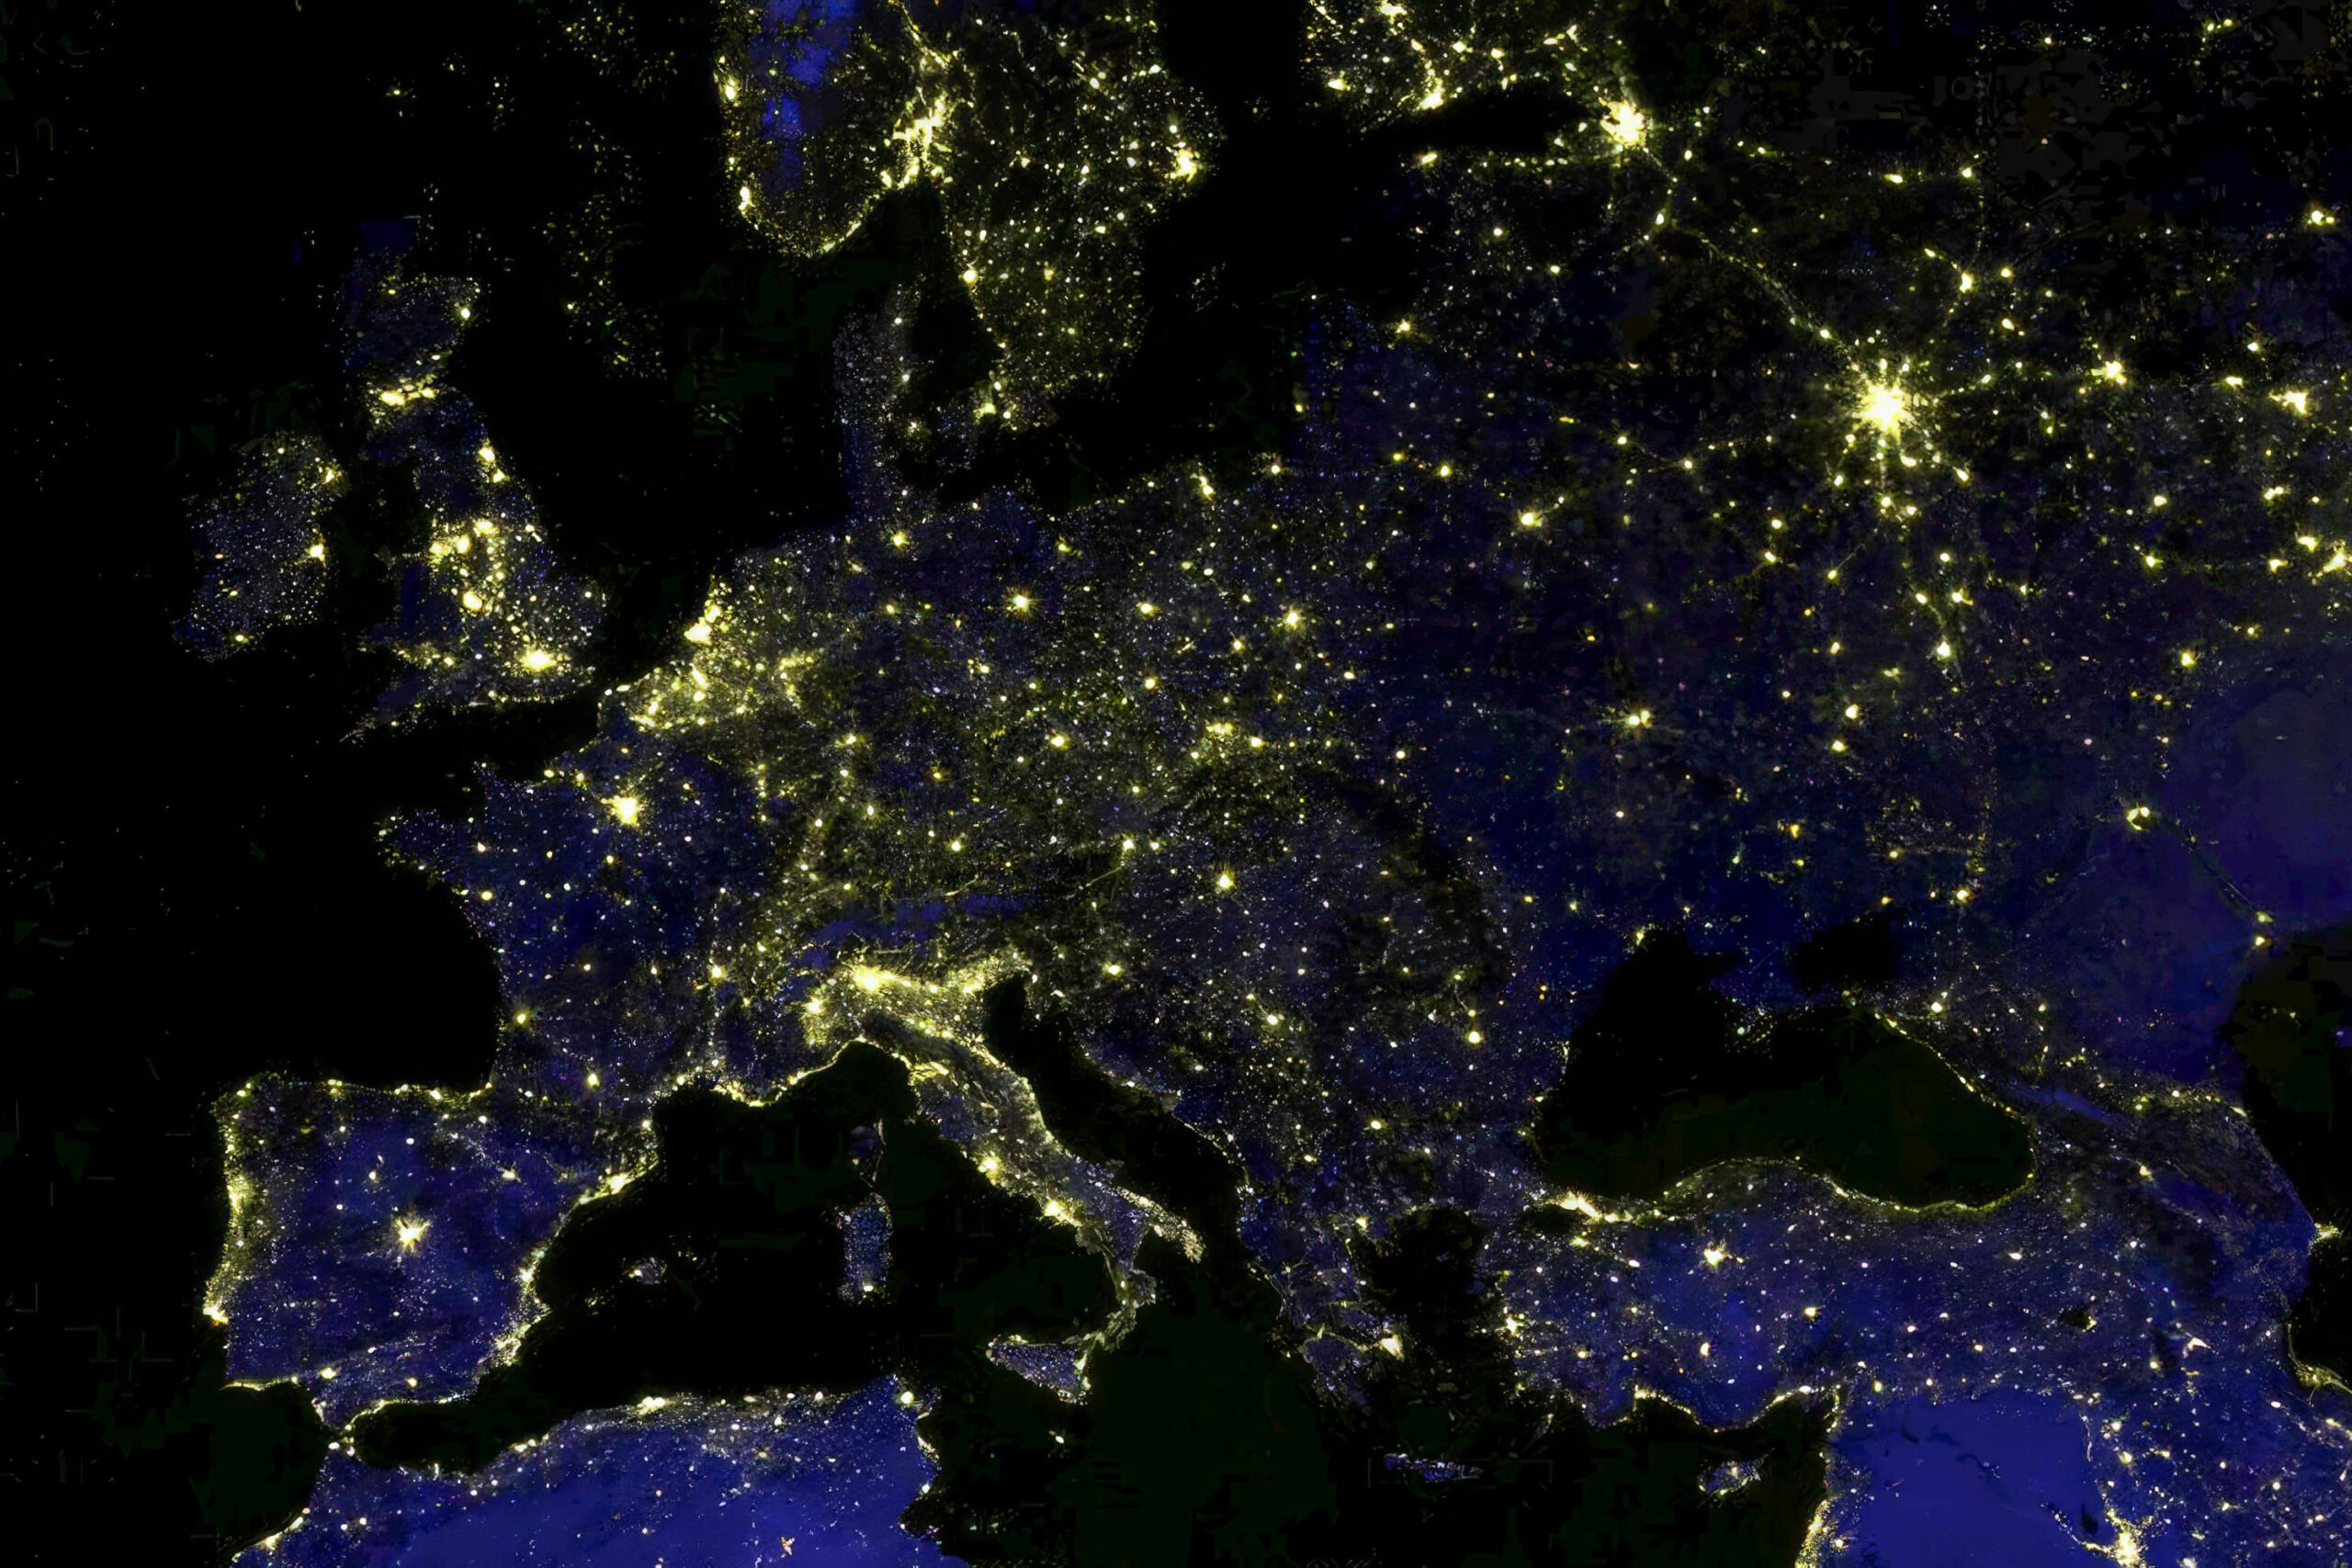 Europe at night from space.